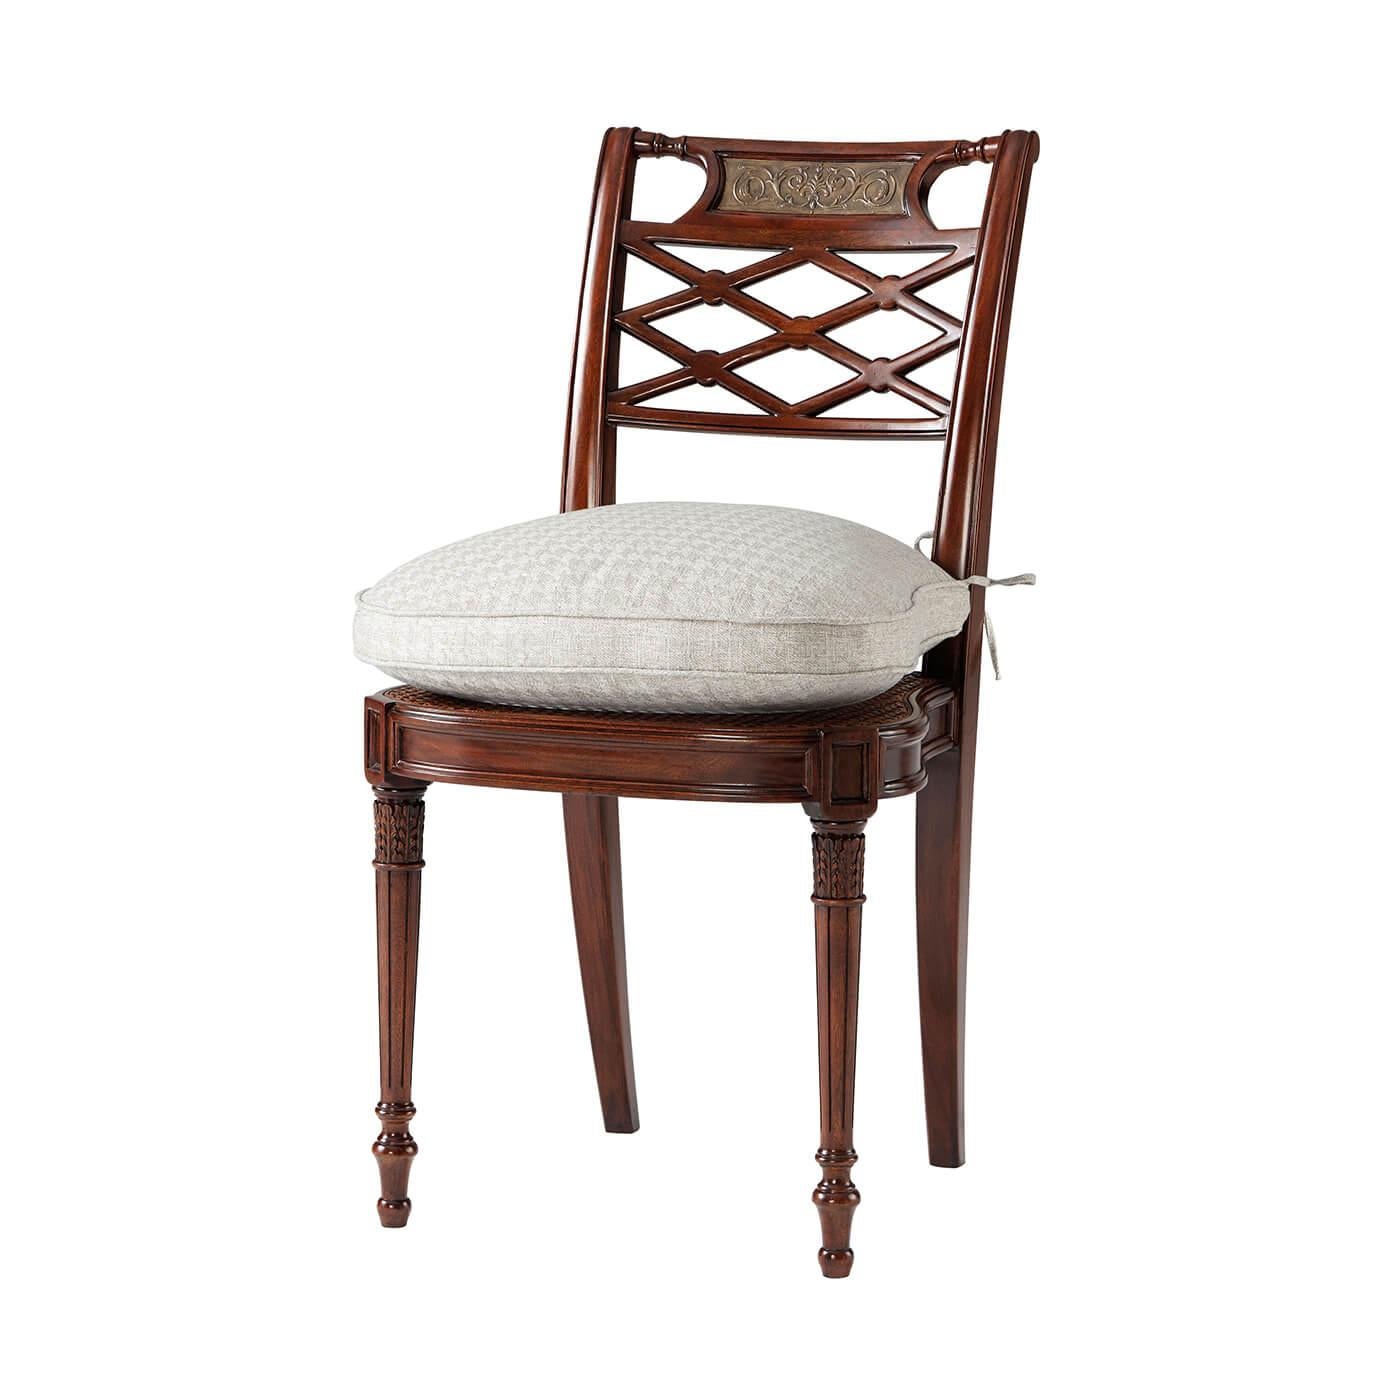 Regency style hand-carved lattice back side chair, the bar top rail inset with a 'bronzed' repoussé plaque above a lattice pierced back, on a caned seat with a tie-on cushion, on turned and fluted legs. 
Dimensions: 20